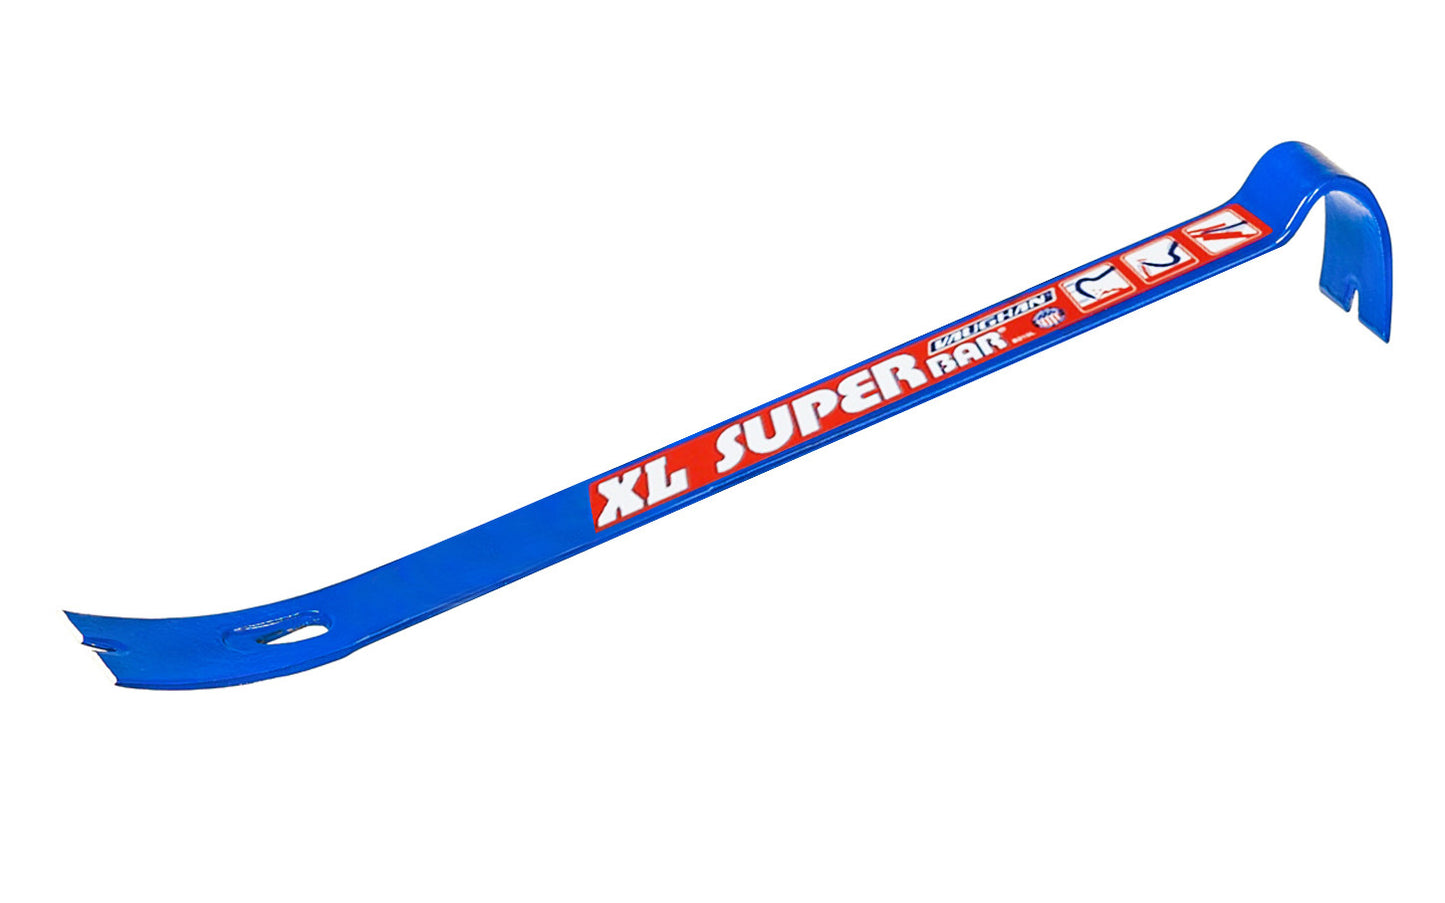 Vaughan Pry Bar "XL Super Bar" ~ Made in the USA